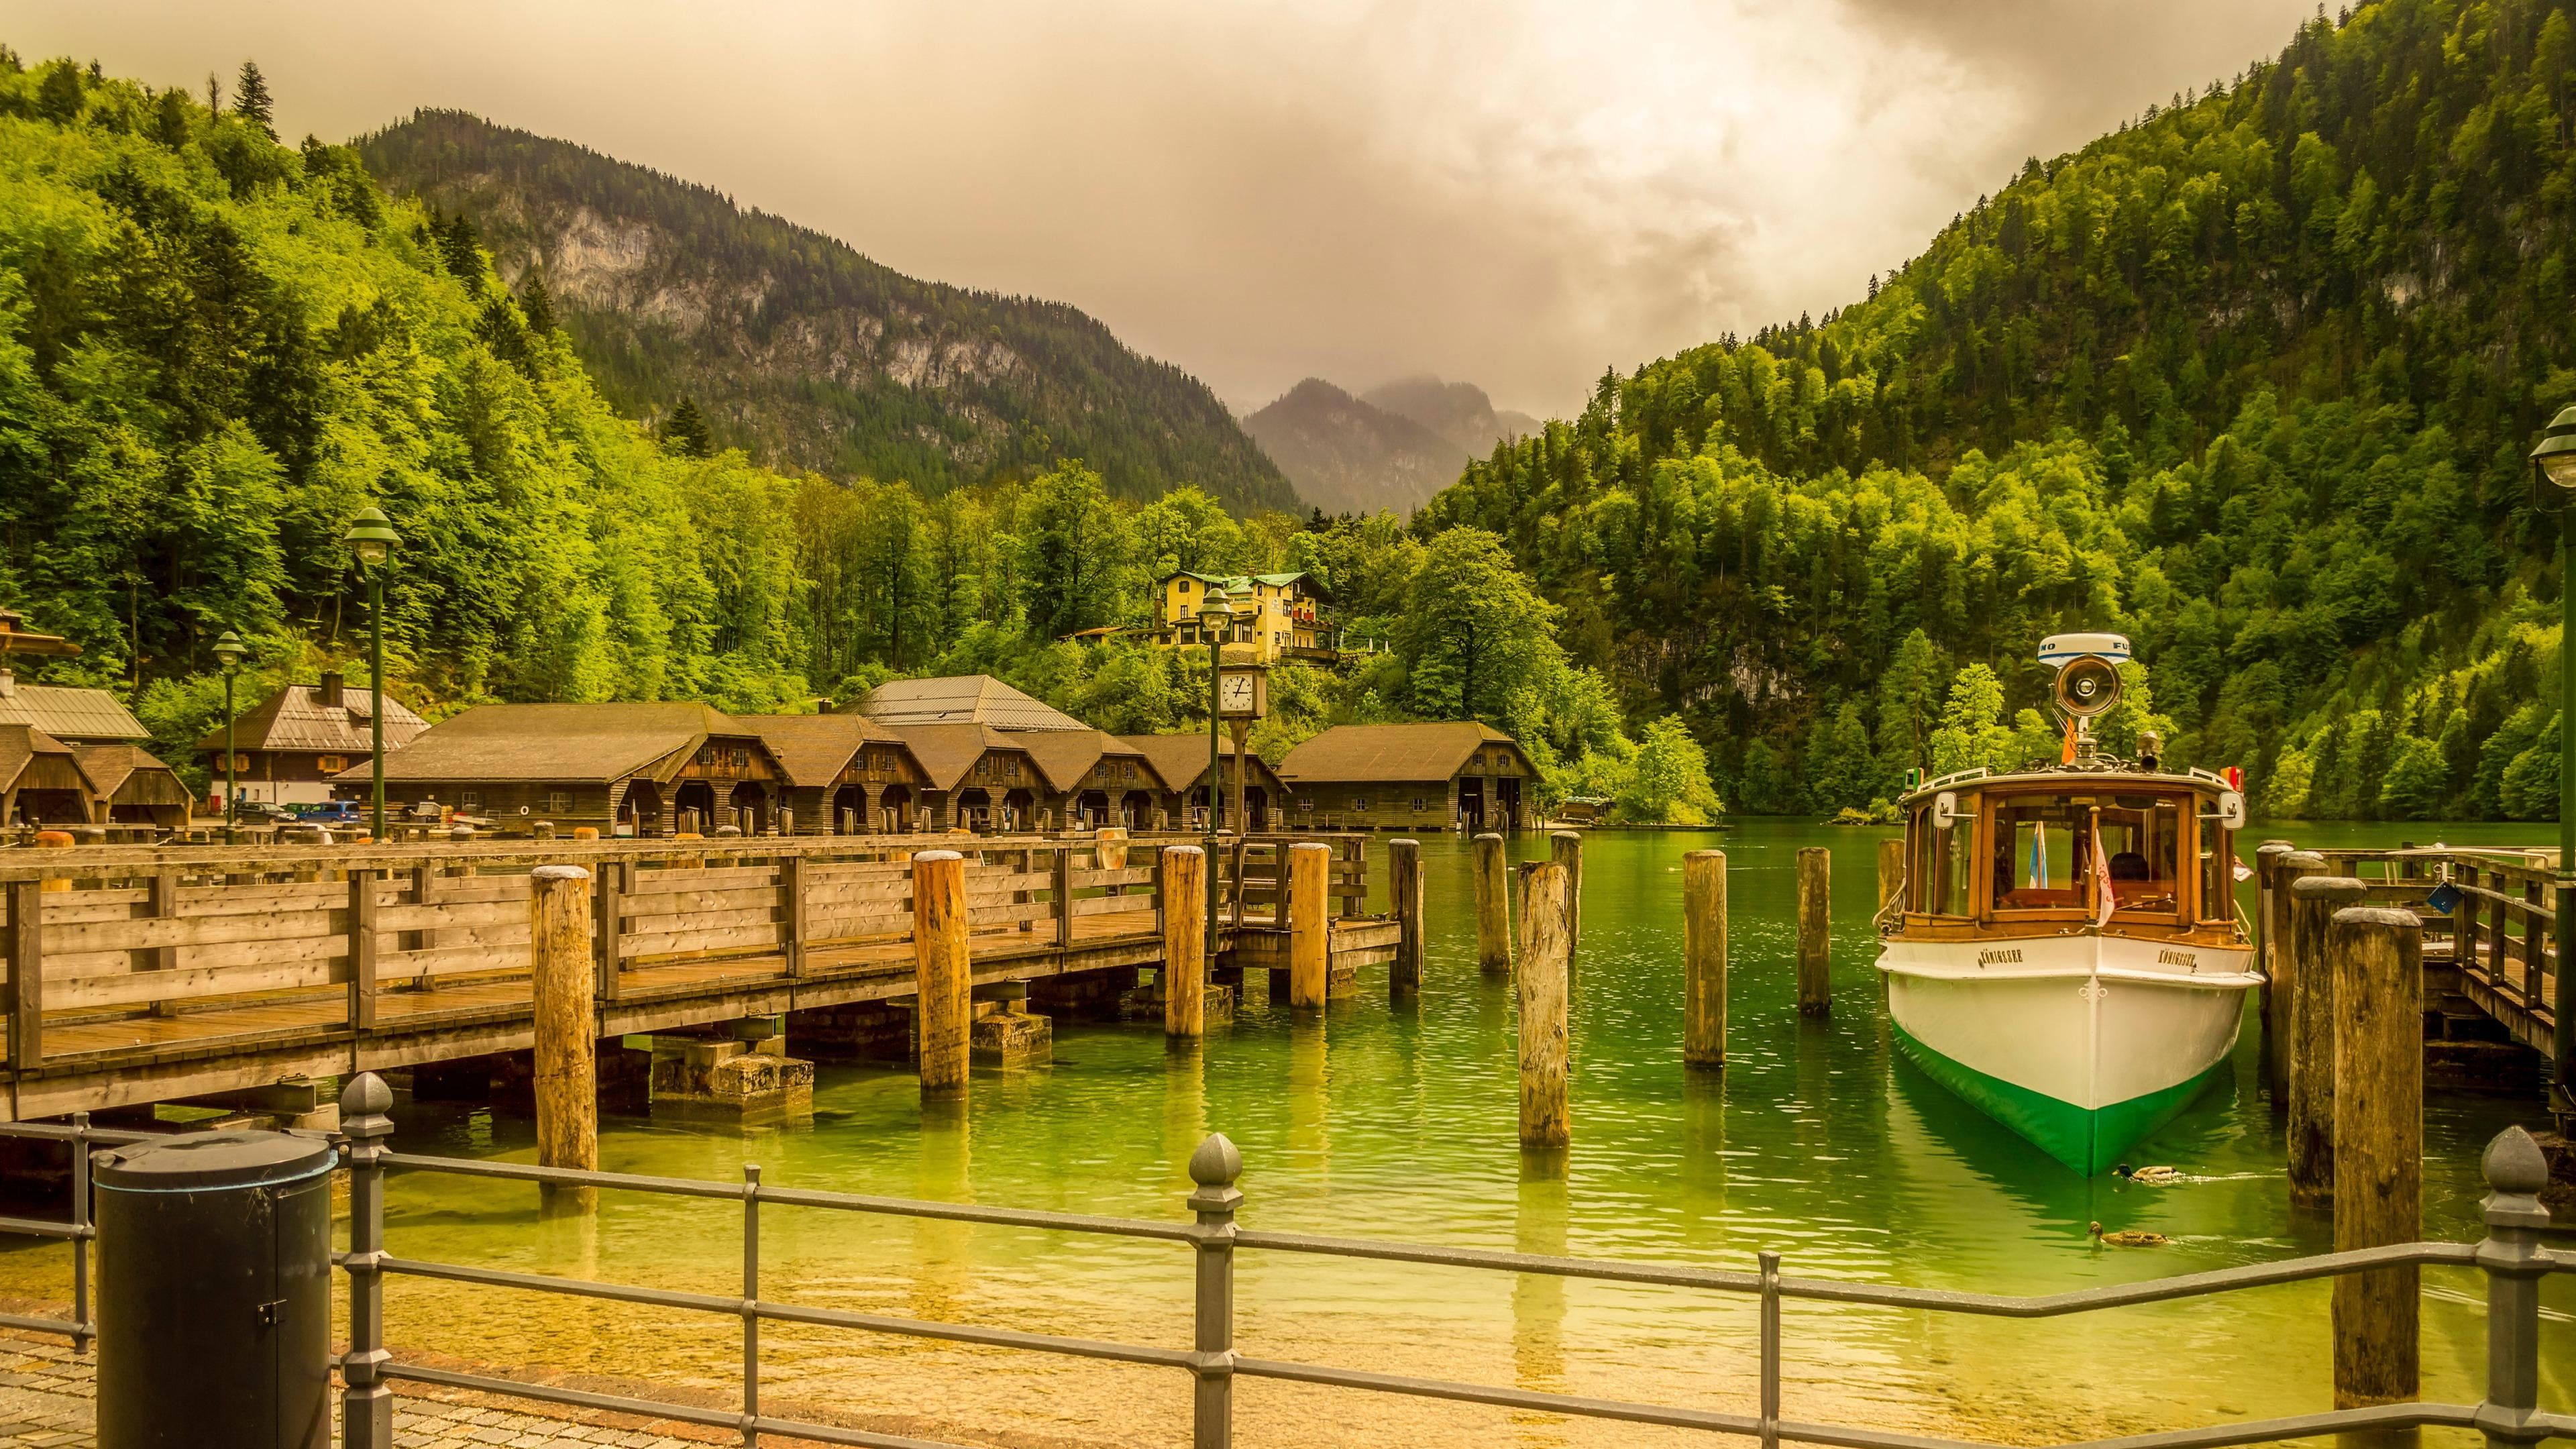 Boat, lake, nature, green, water, trees, dock, leisure, landscape